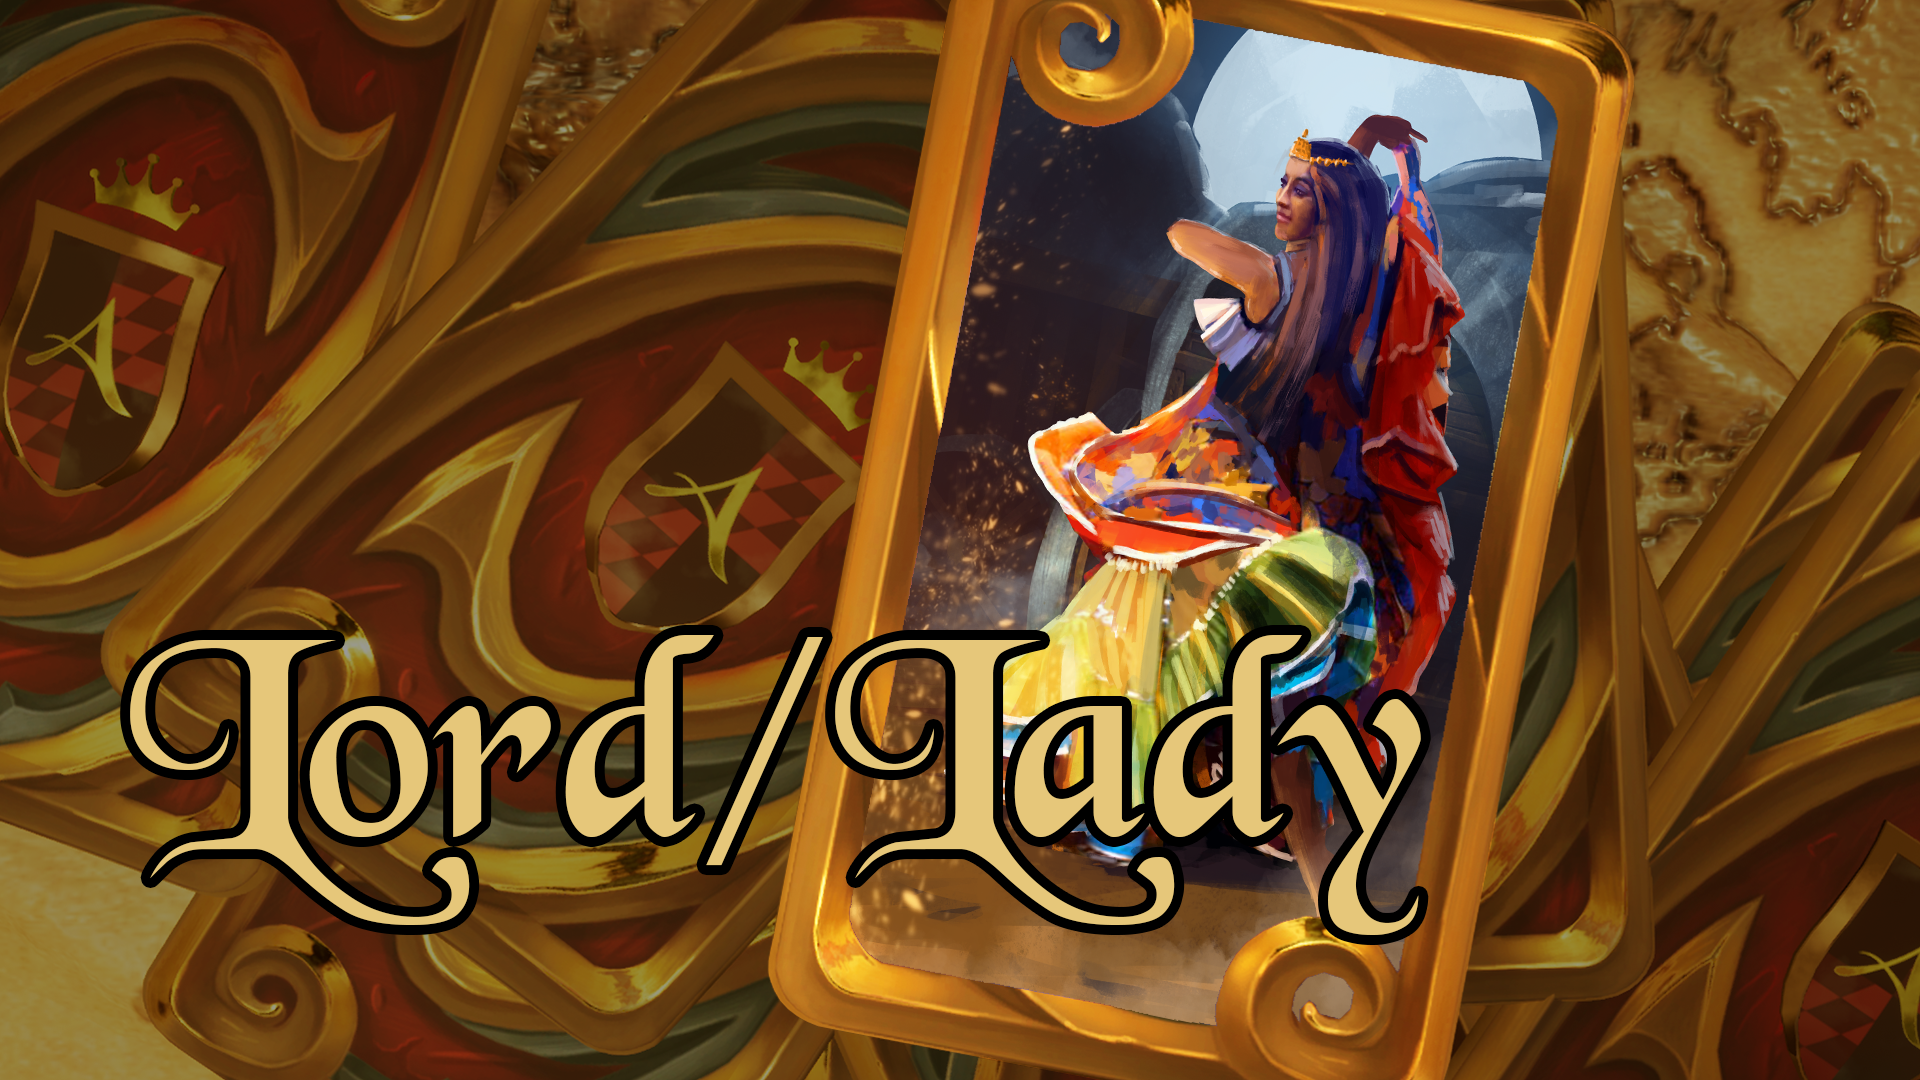 Lord/Lady